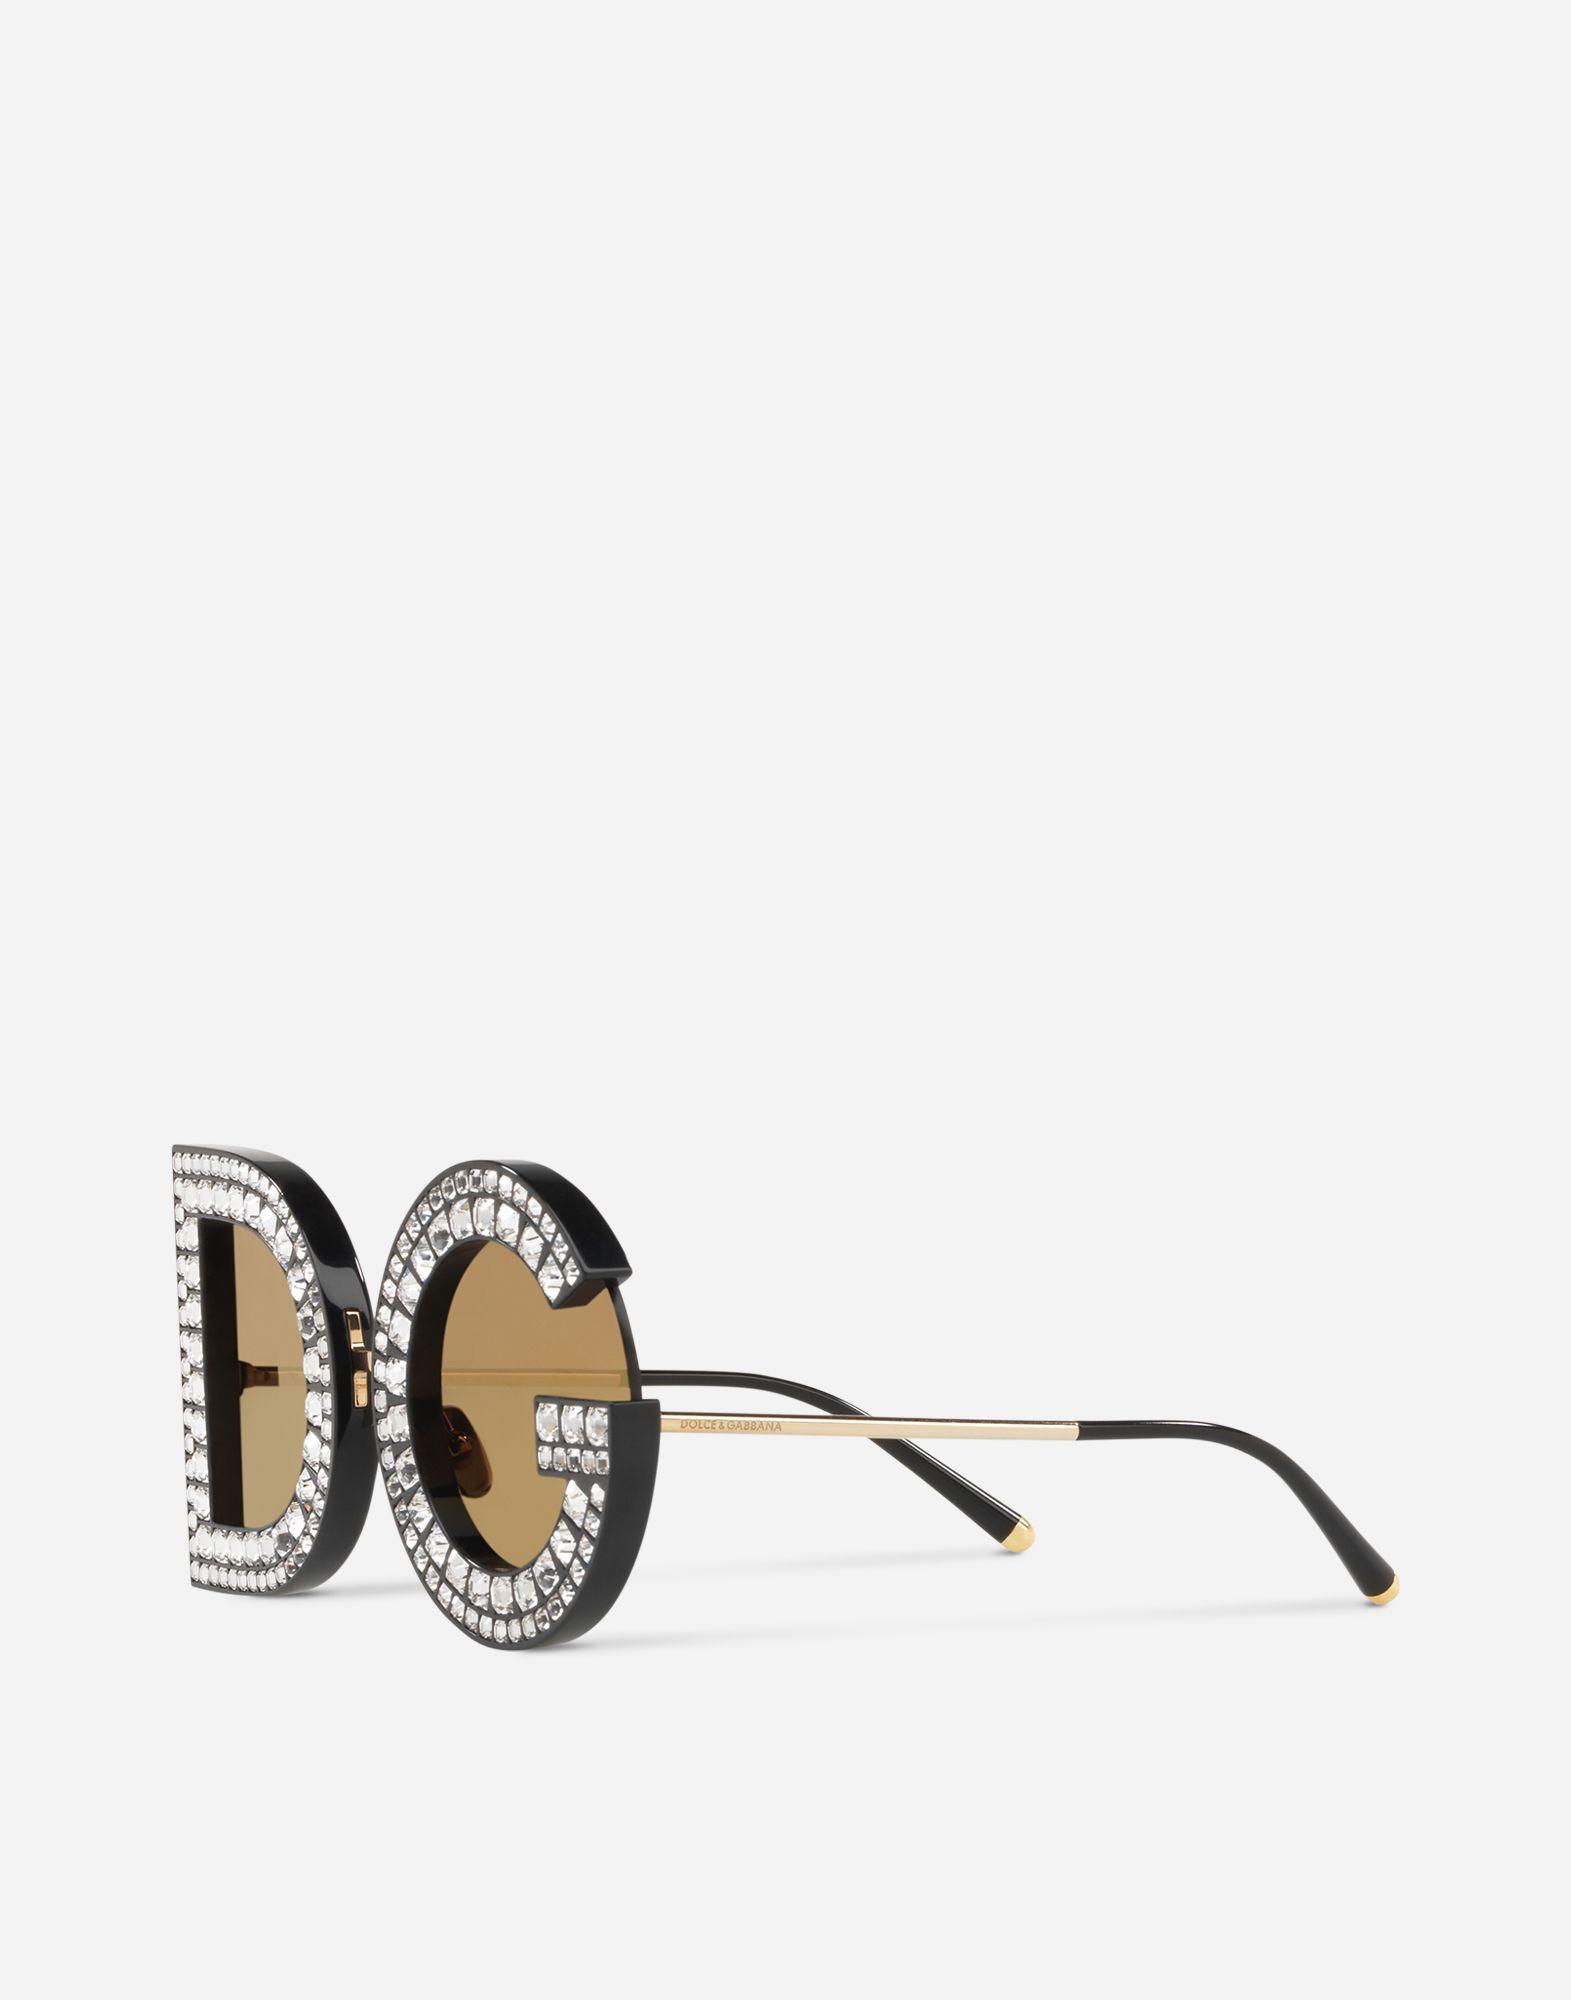 Dolce and Gabanna Logo - Women's Sunglasses. Dolce&Gabbana SUNGLASSES WITH CRYSTAL DETAILS